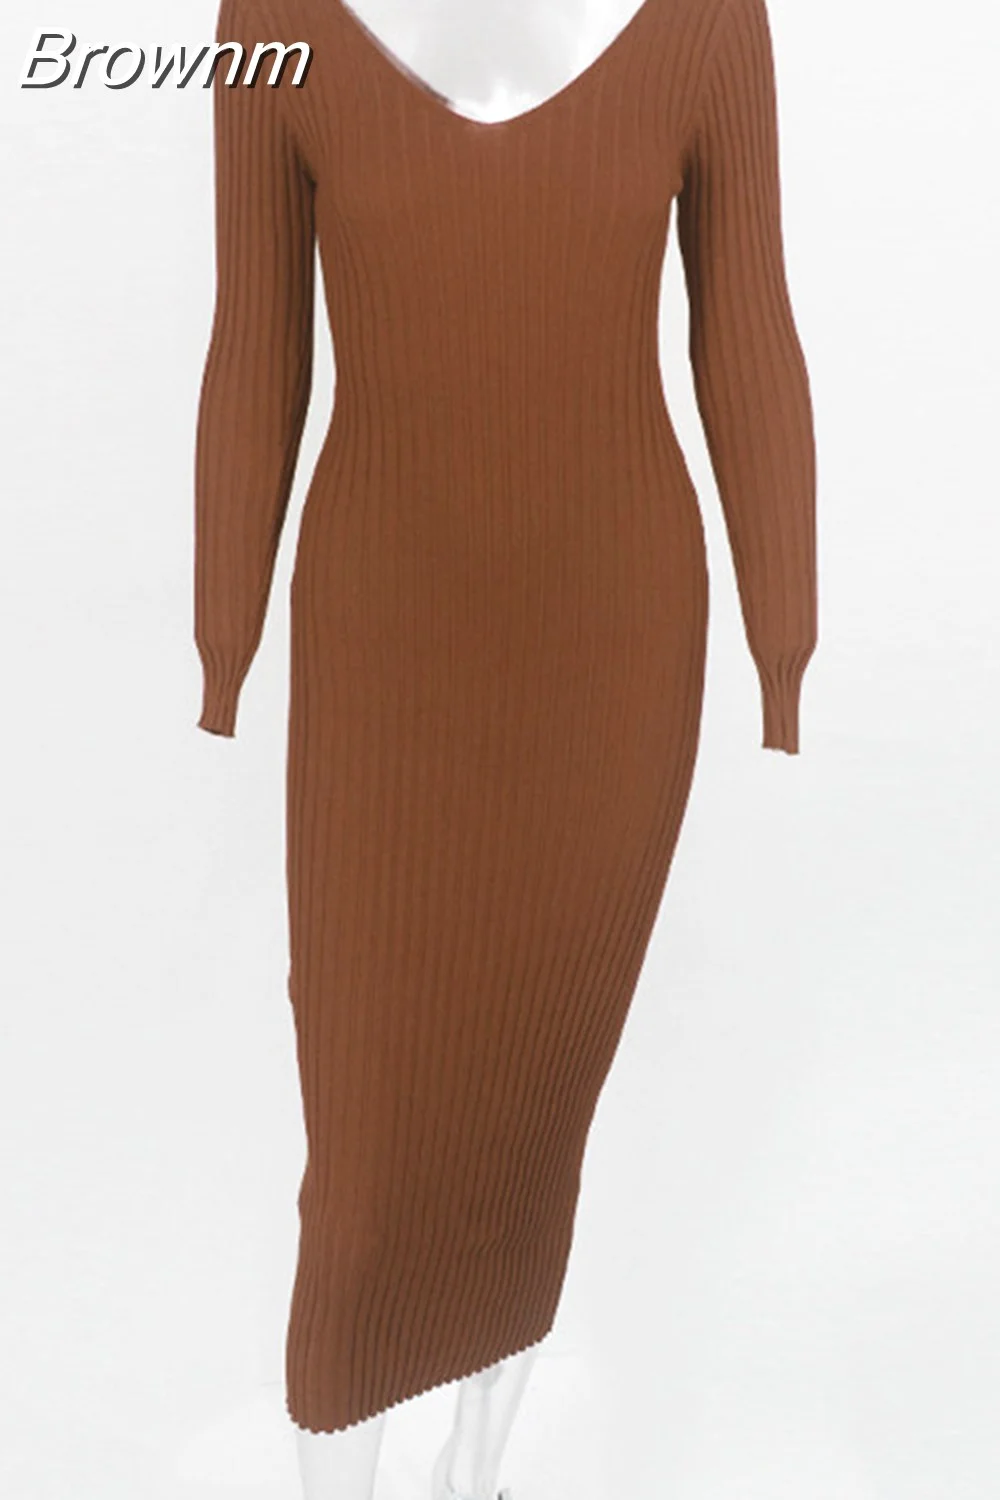 Brownm Winter Ribbed Knitted Cotton Dress Women Off Shoulder Long Sleeve Sexy Bodycon Dresses Elastic Slim Party Vestidos 2023